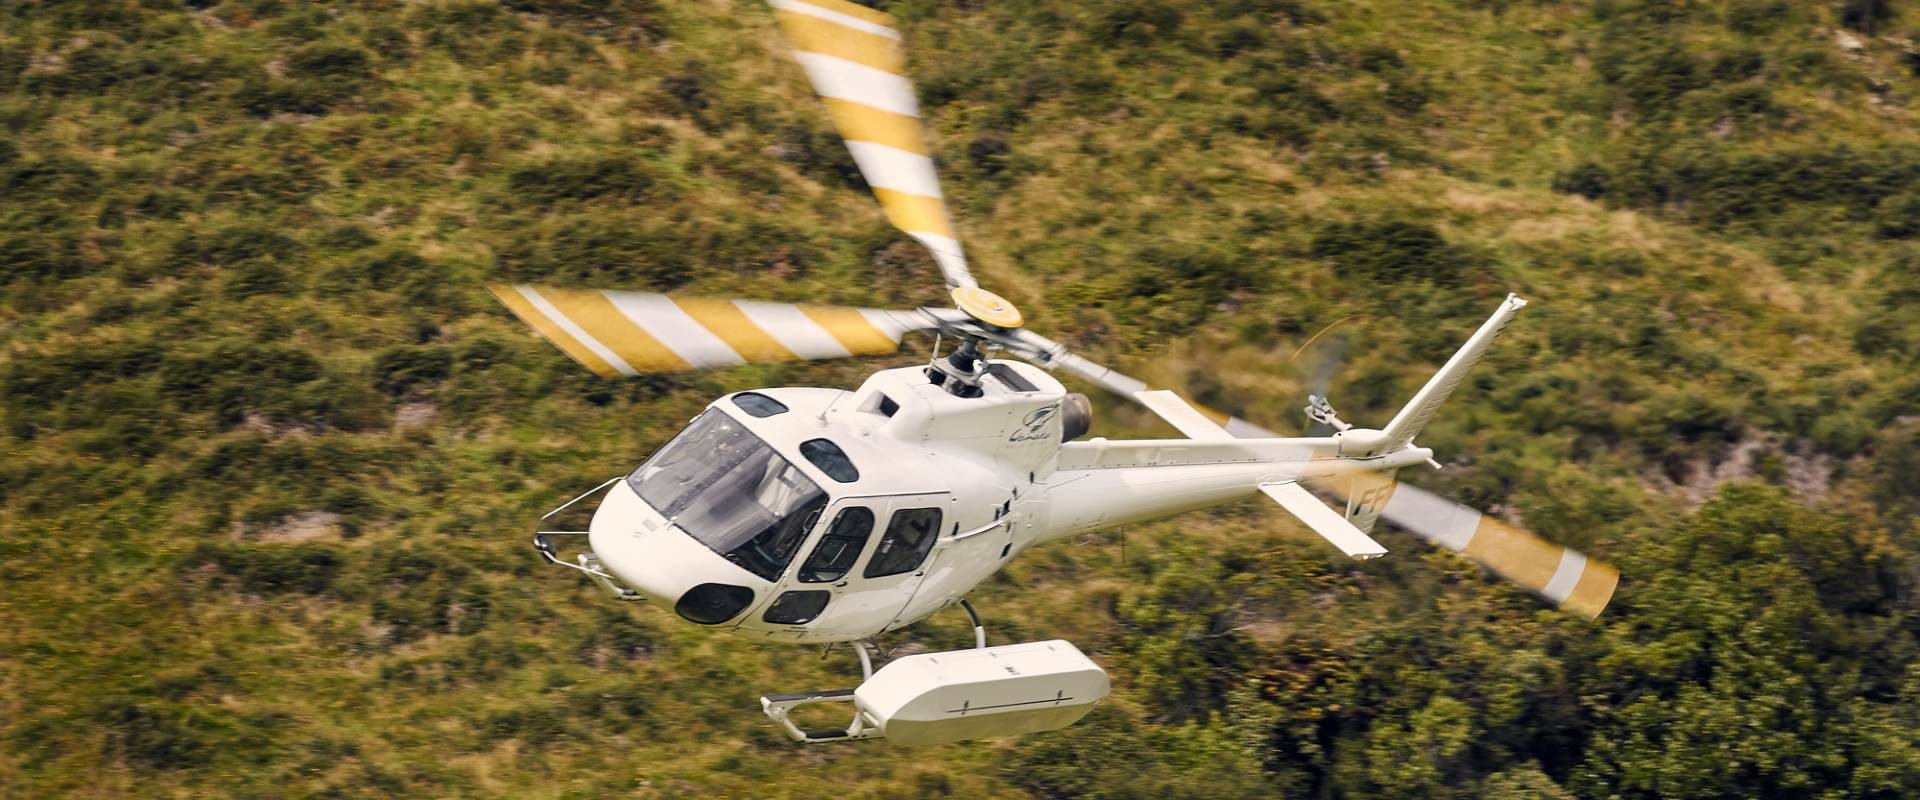 Commercial - Charter Helicopter Services